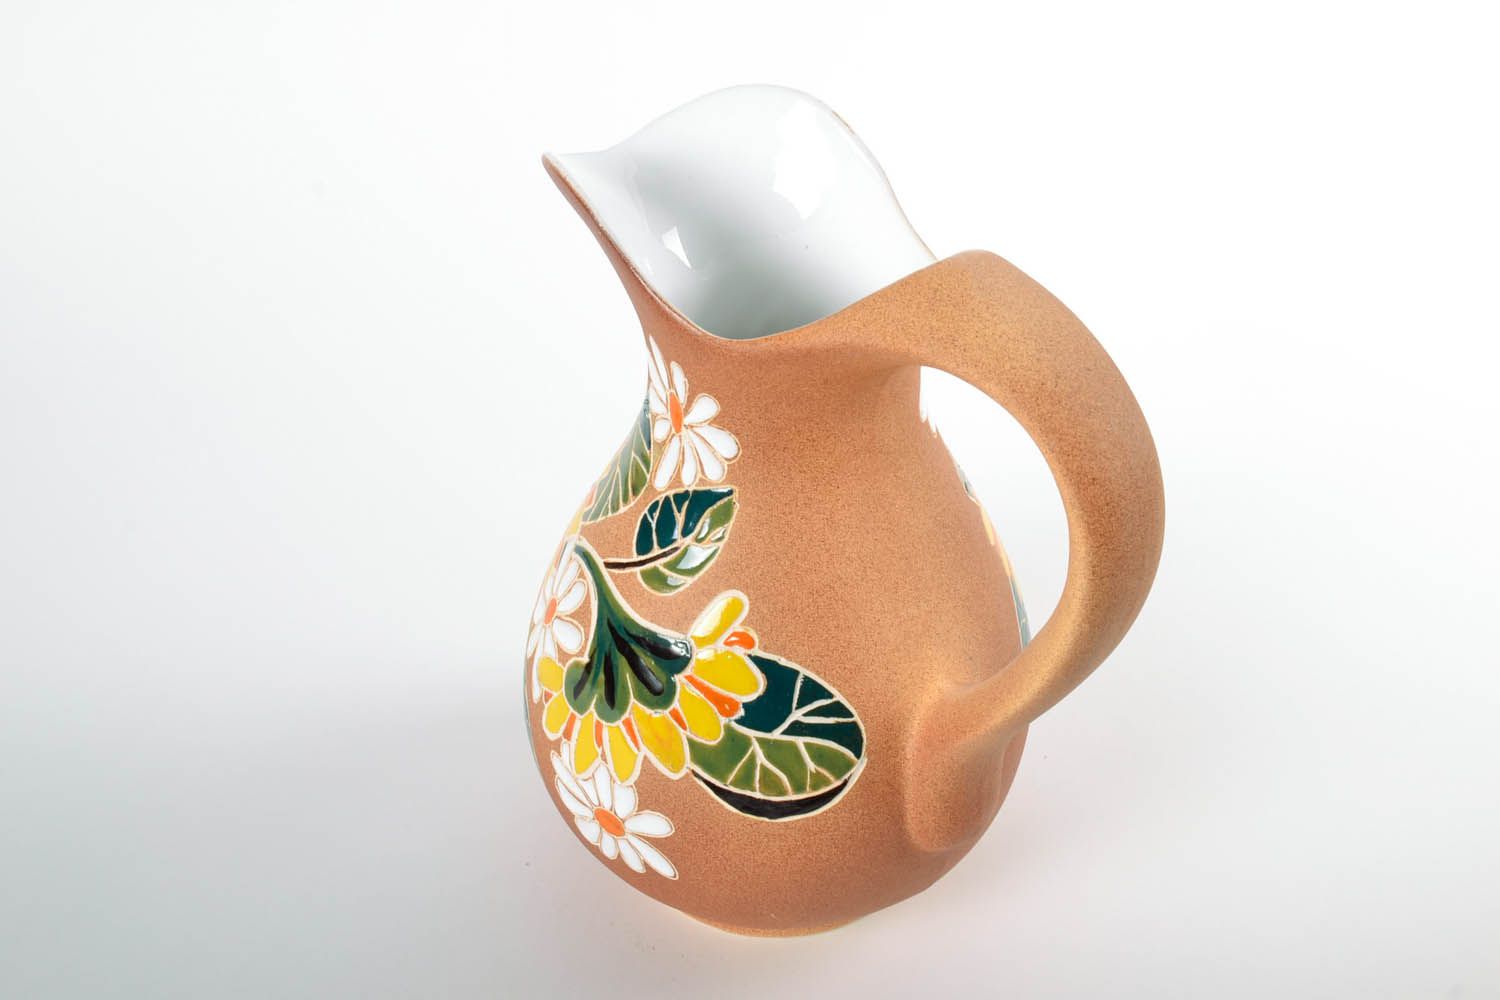 100 oz ceramic water pitcher with handle and floral design in beige, yellow, green colors 4 lb photo 4